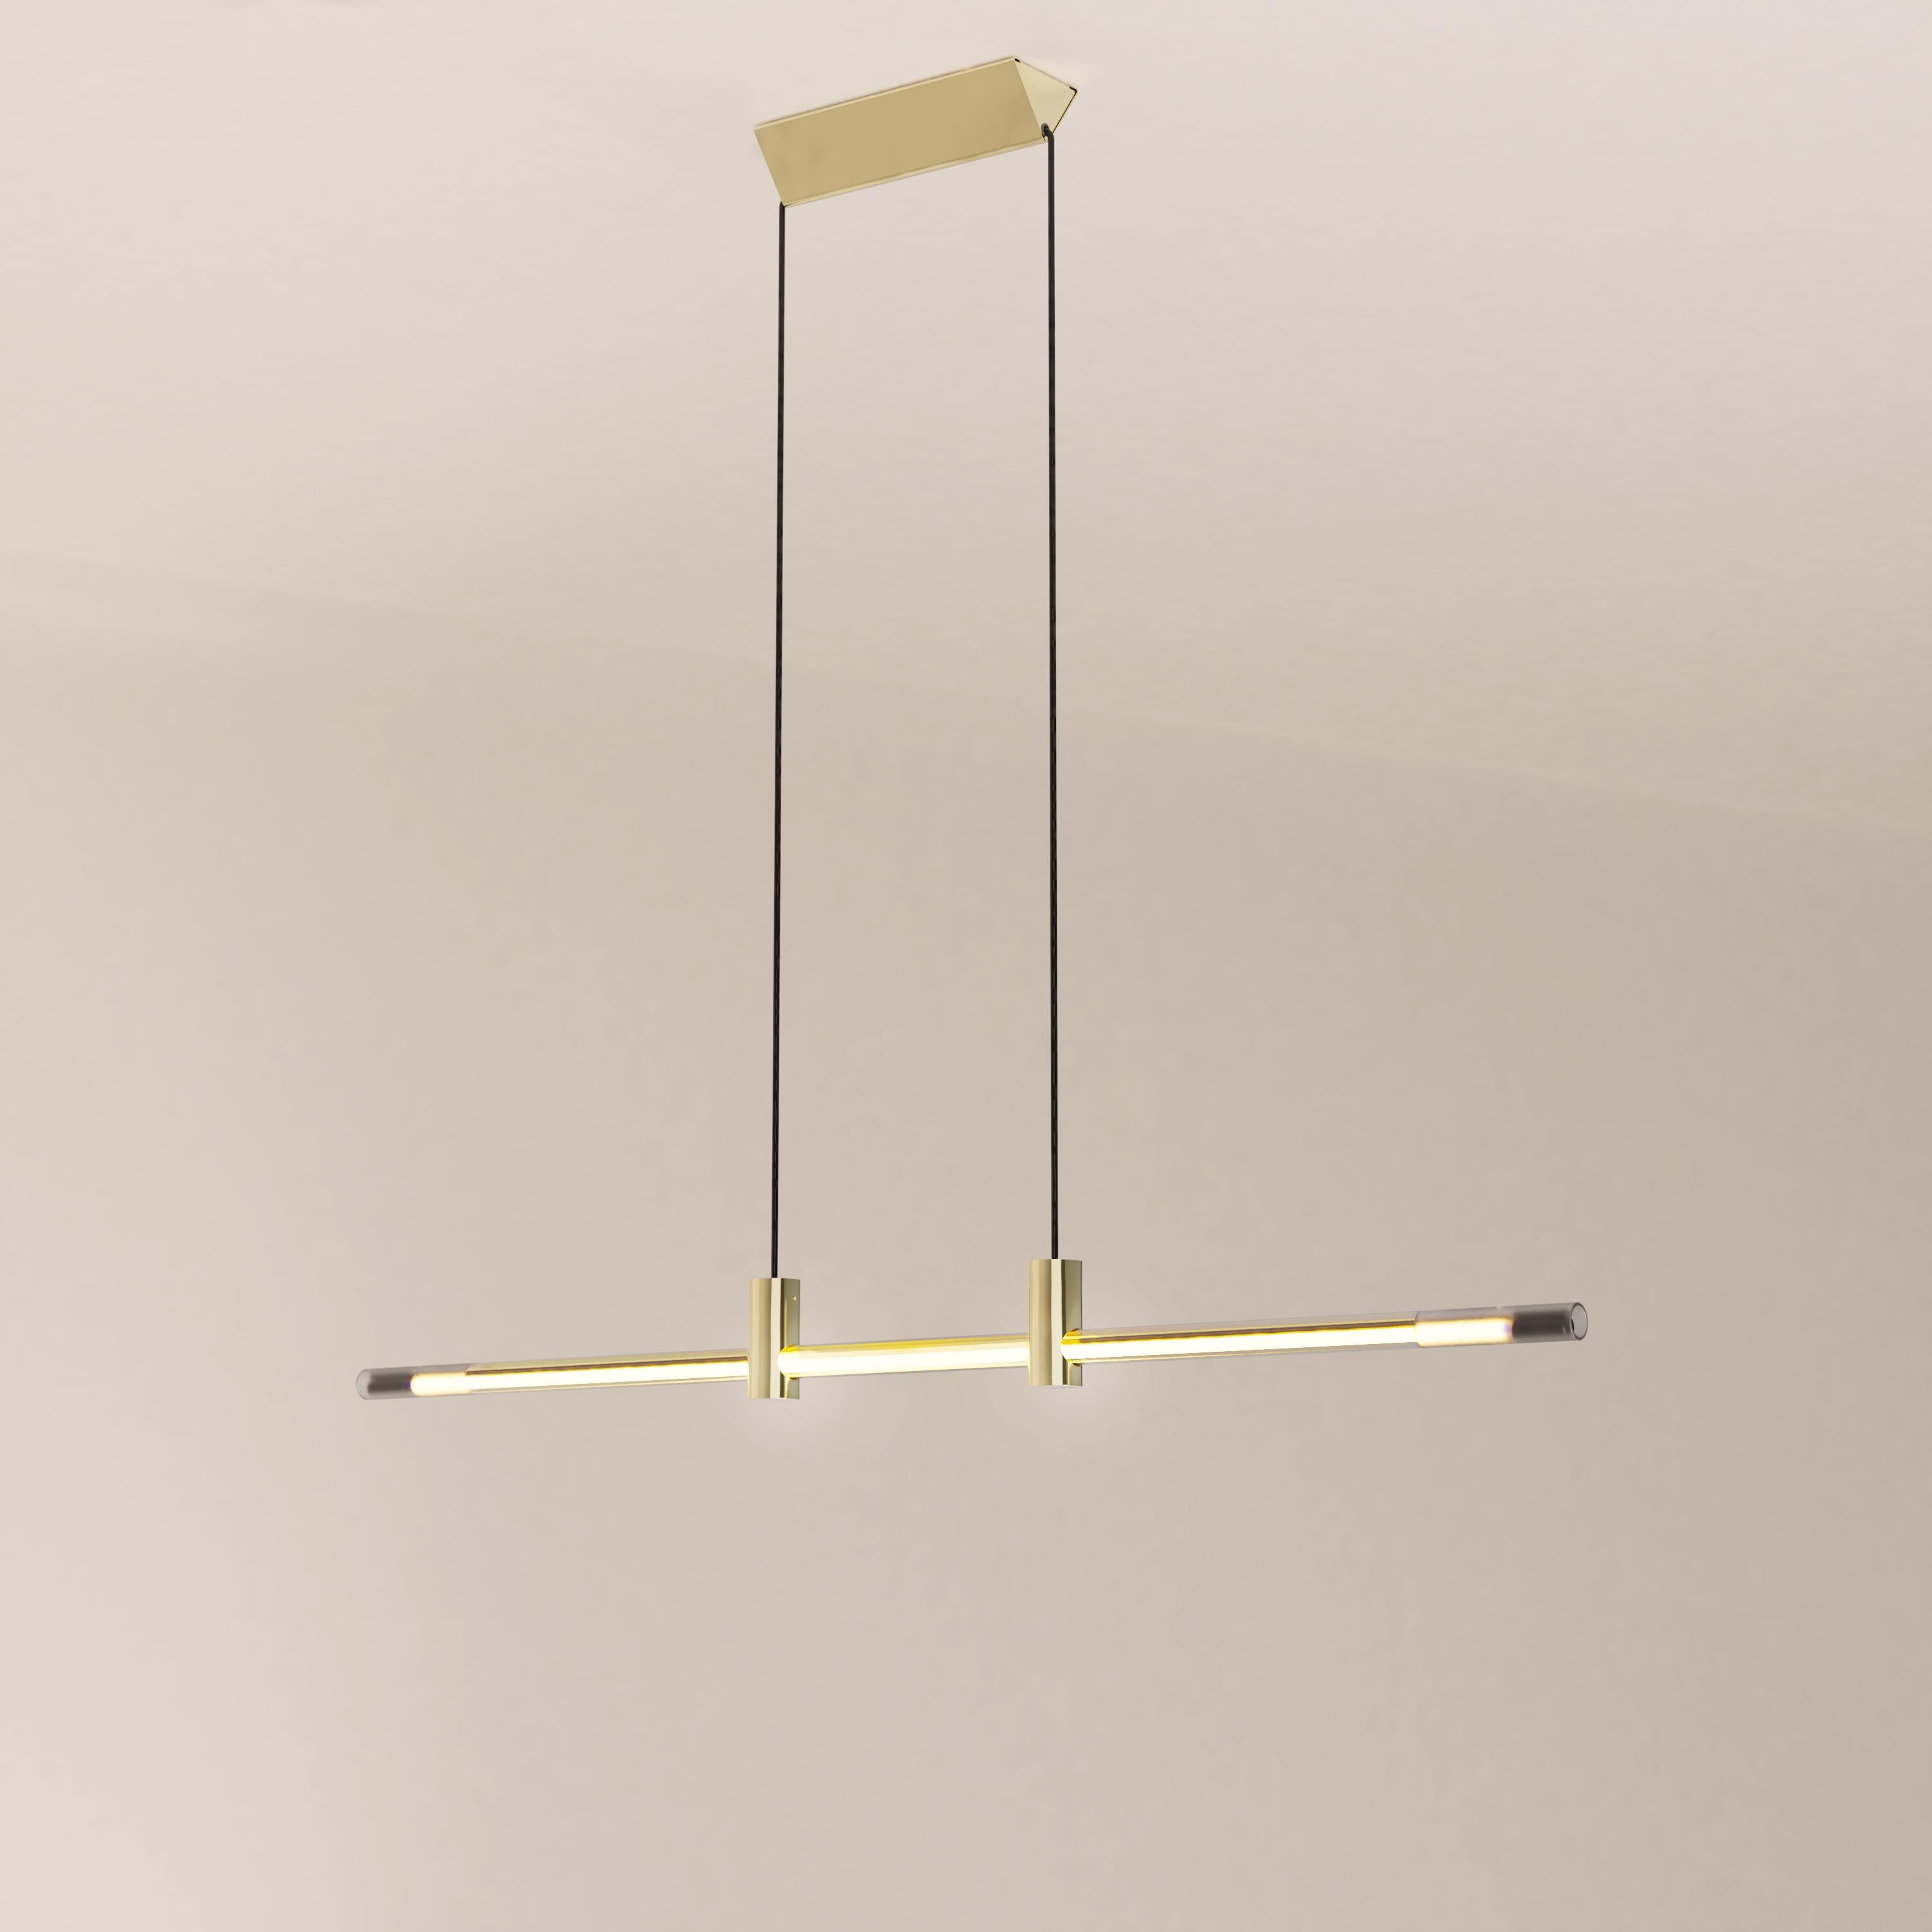 The Ra Line in its brass plated finish is a contemporary hand-blown glass and brass pendant lighting.

The Ra Line is distinguished by a marked opposition between heaviness and lightness. The assemblage of the borosilicate glass tube that
pierces